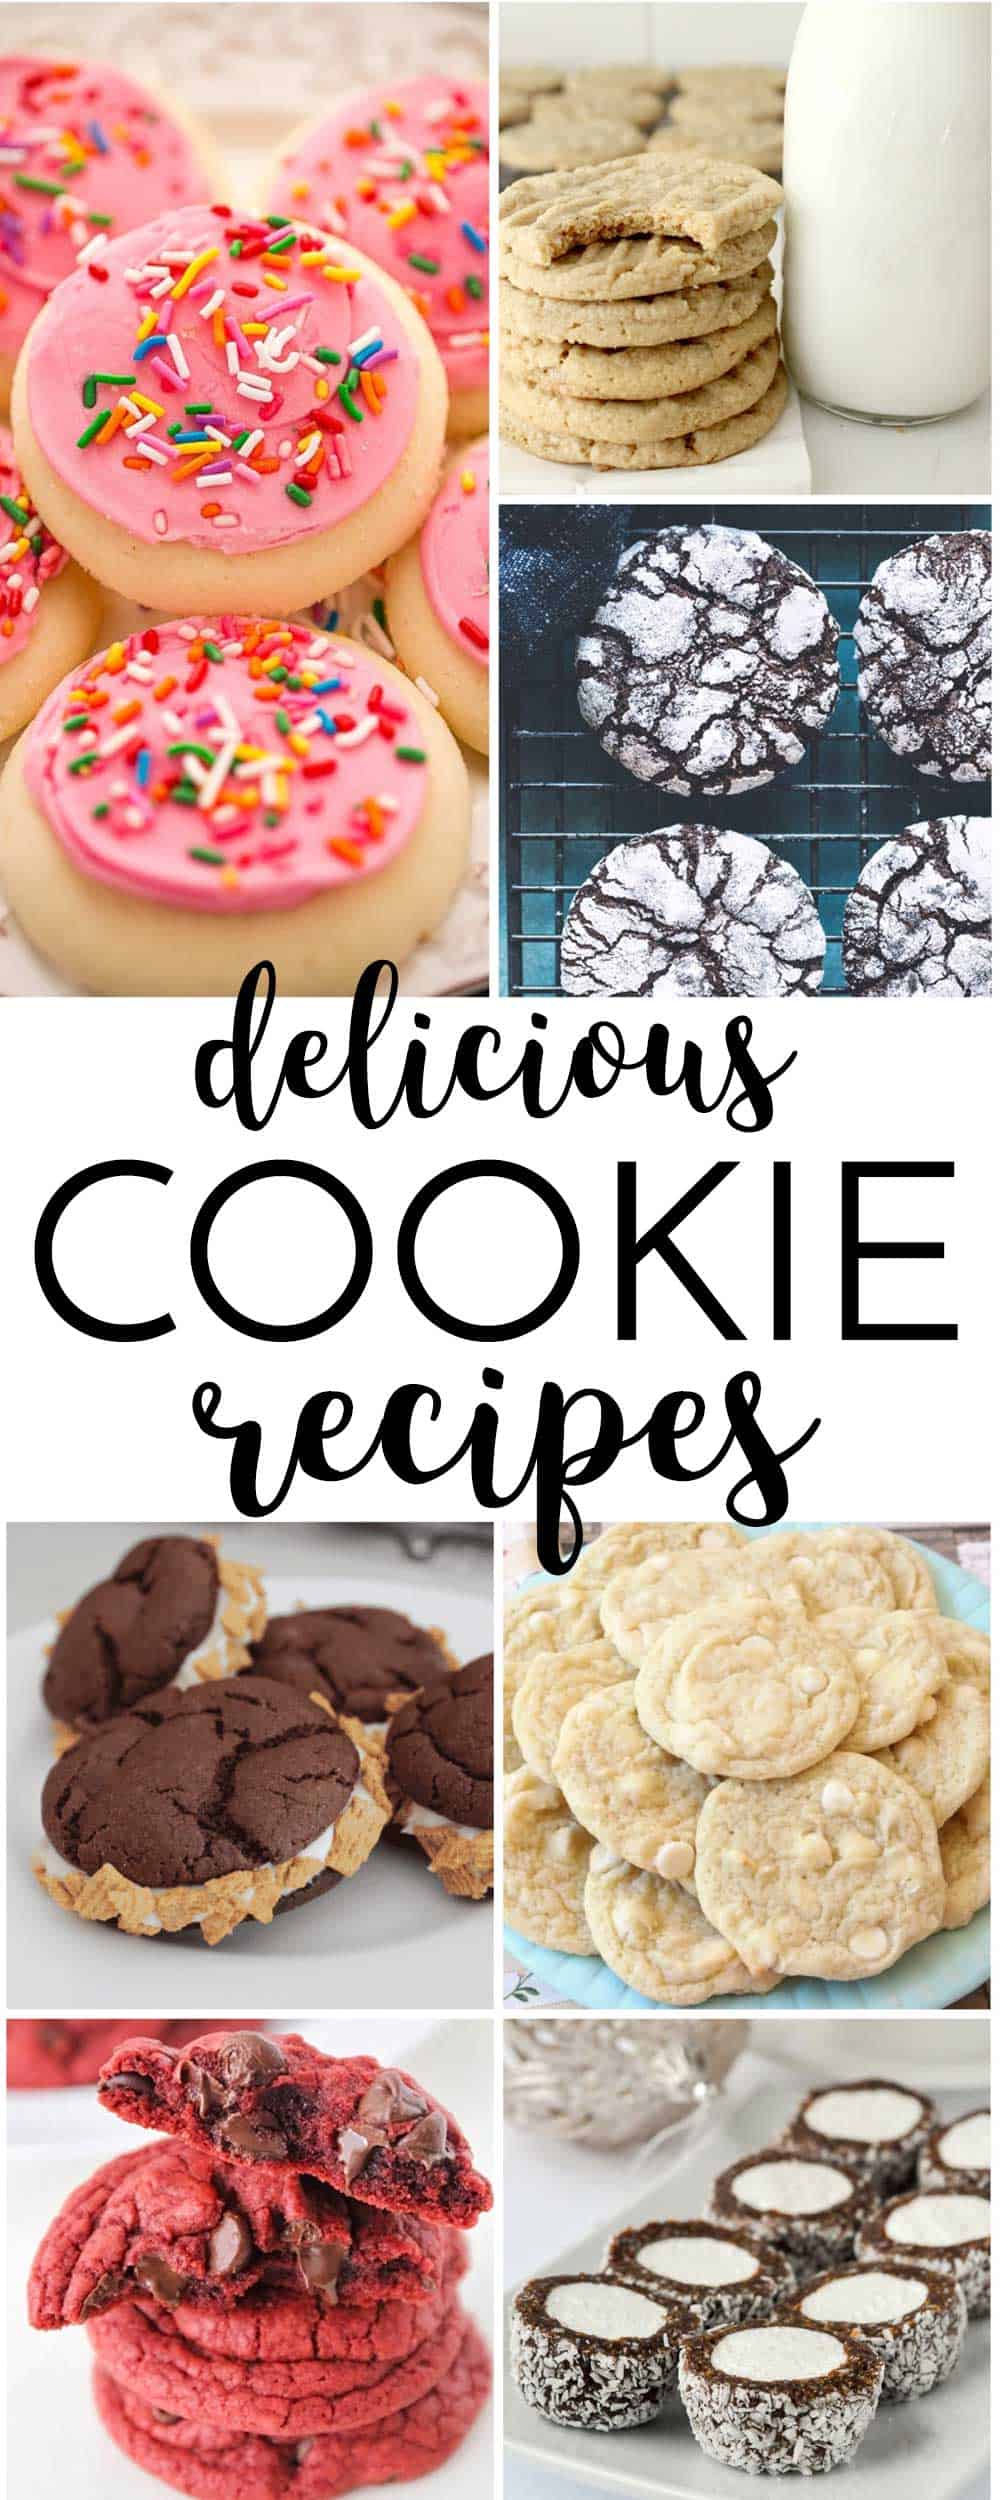 yummy cookie recipes